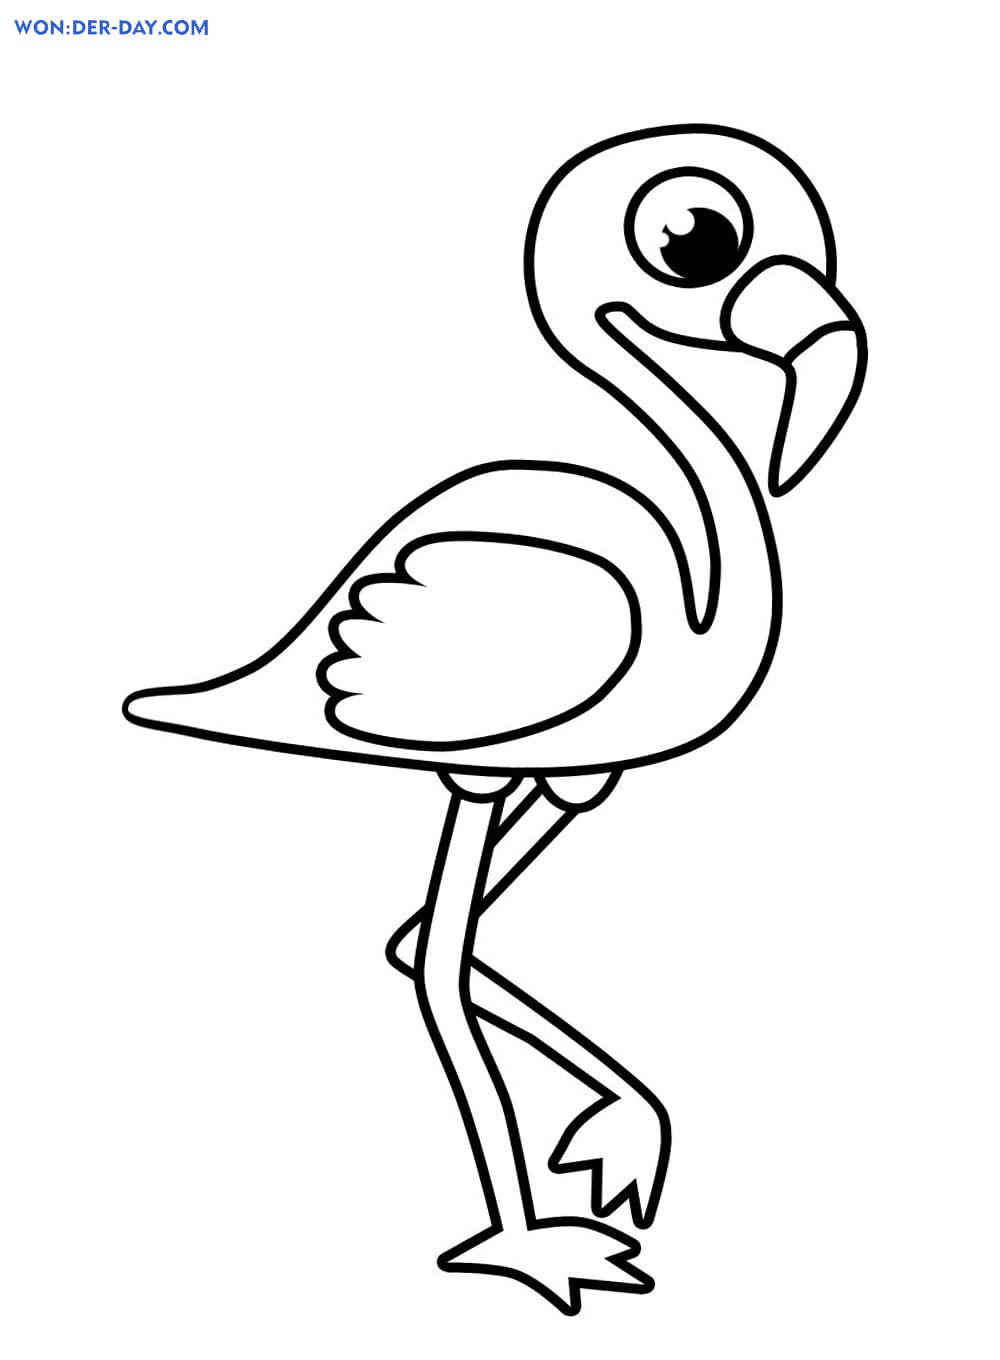 Pink Flamingo Coloring Pages   Flamingo Coloring Pages   Coloring ...